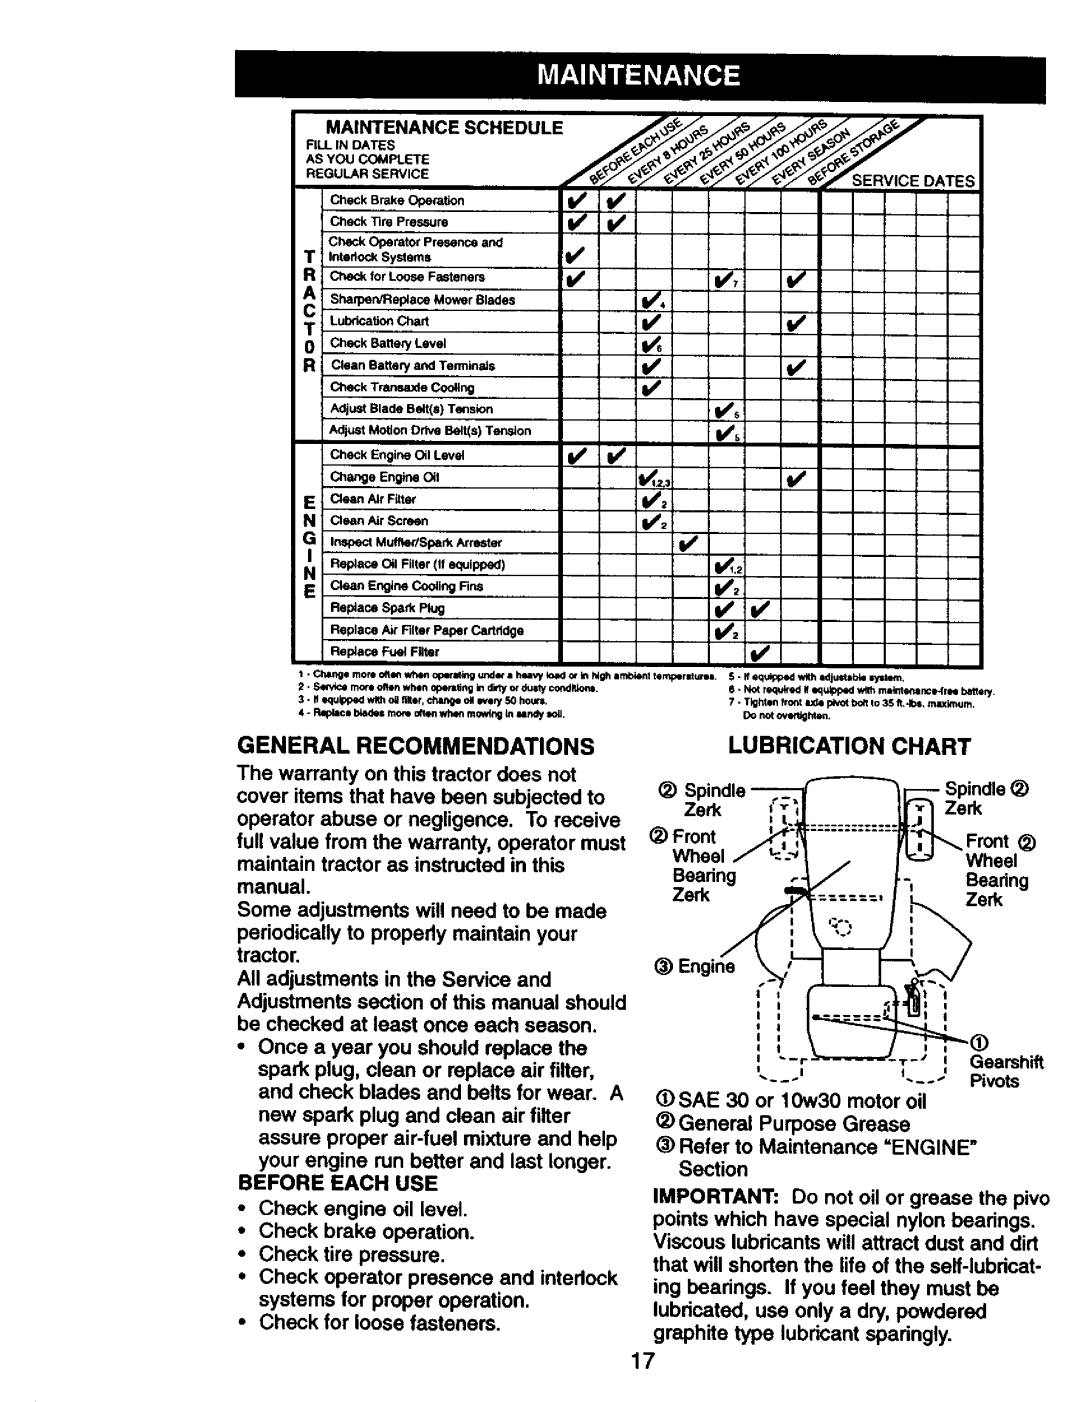 Craftsman 917.27075 owner manual Lubrication, Chart, General Recommendations, I General Purpose Grease, Section 